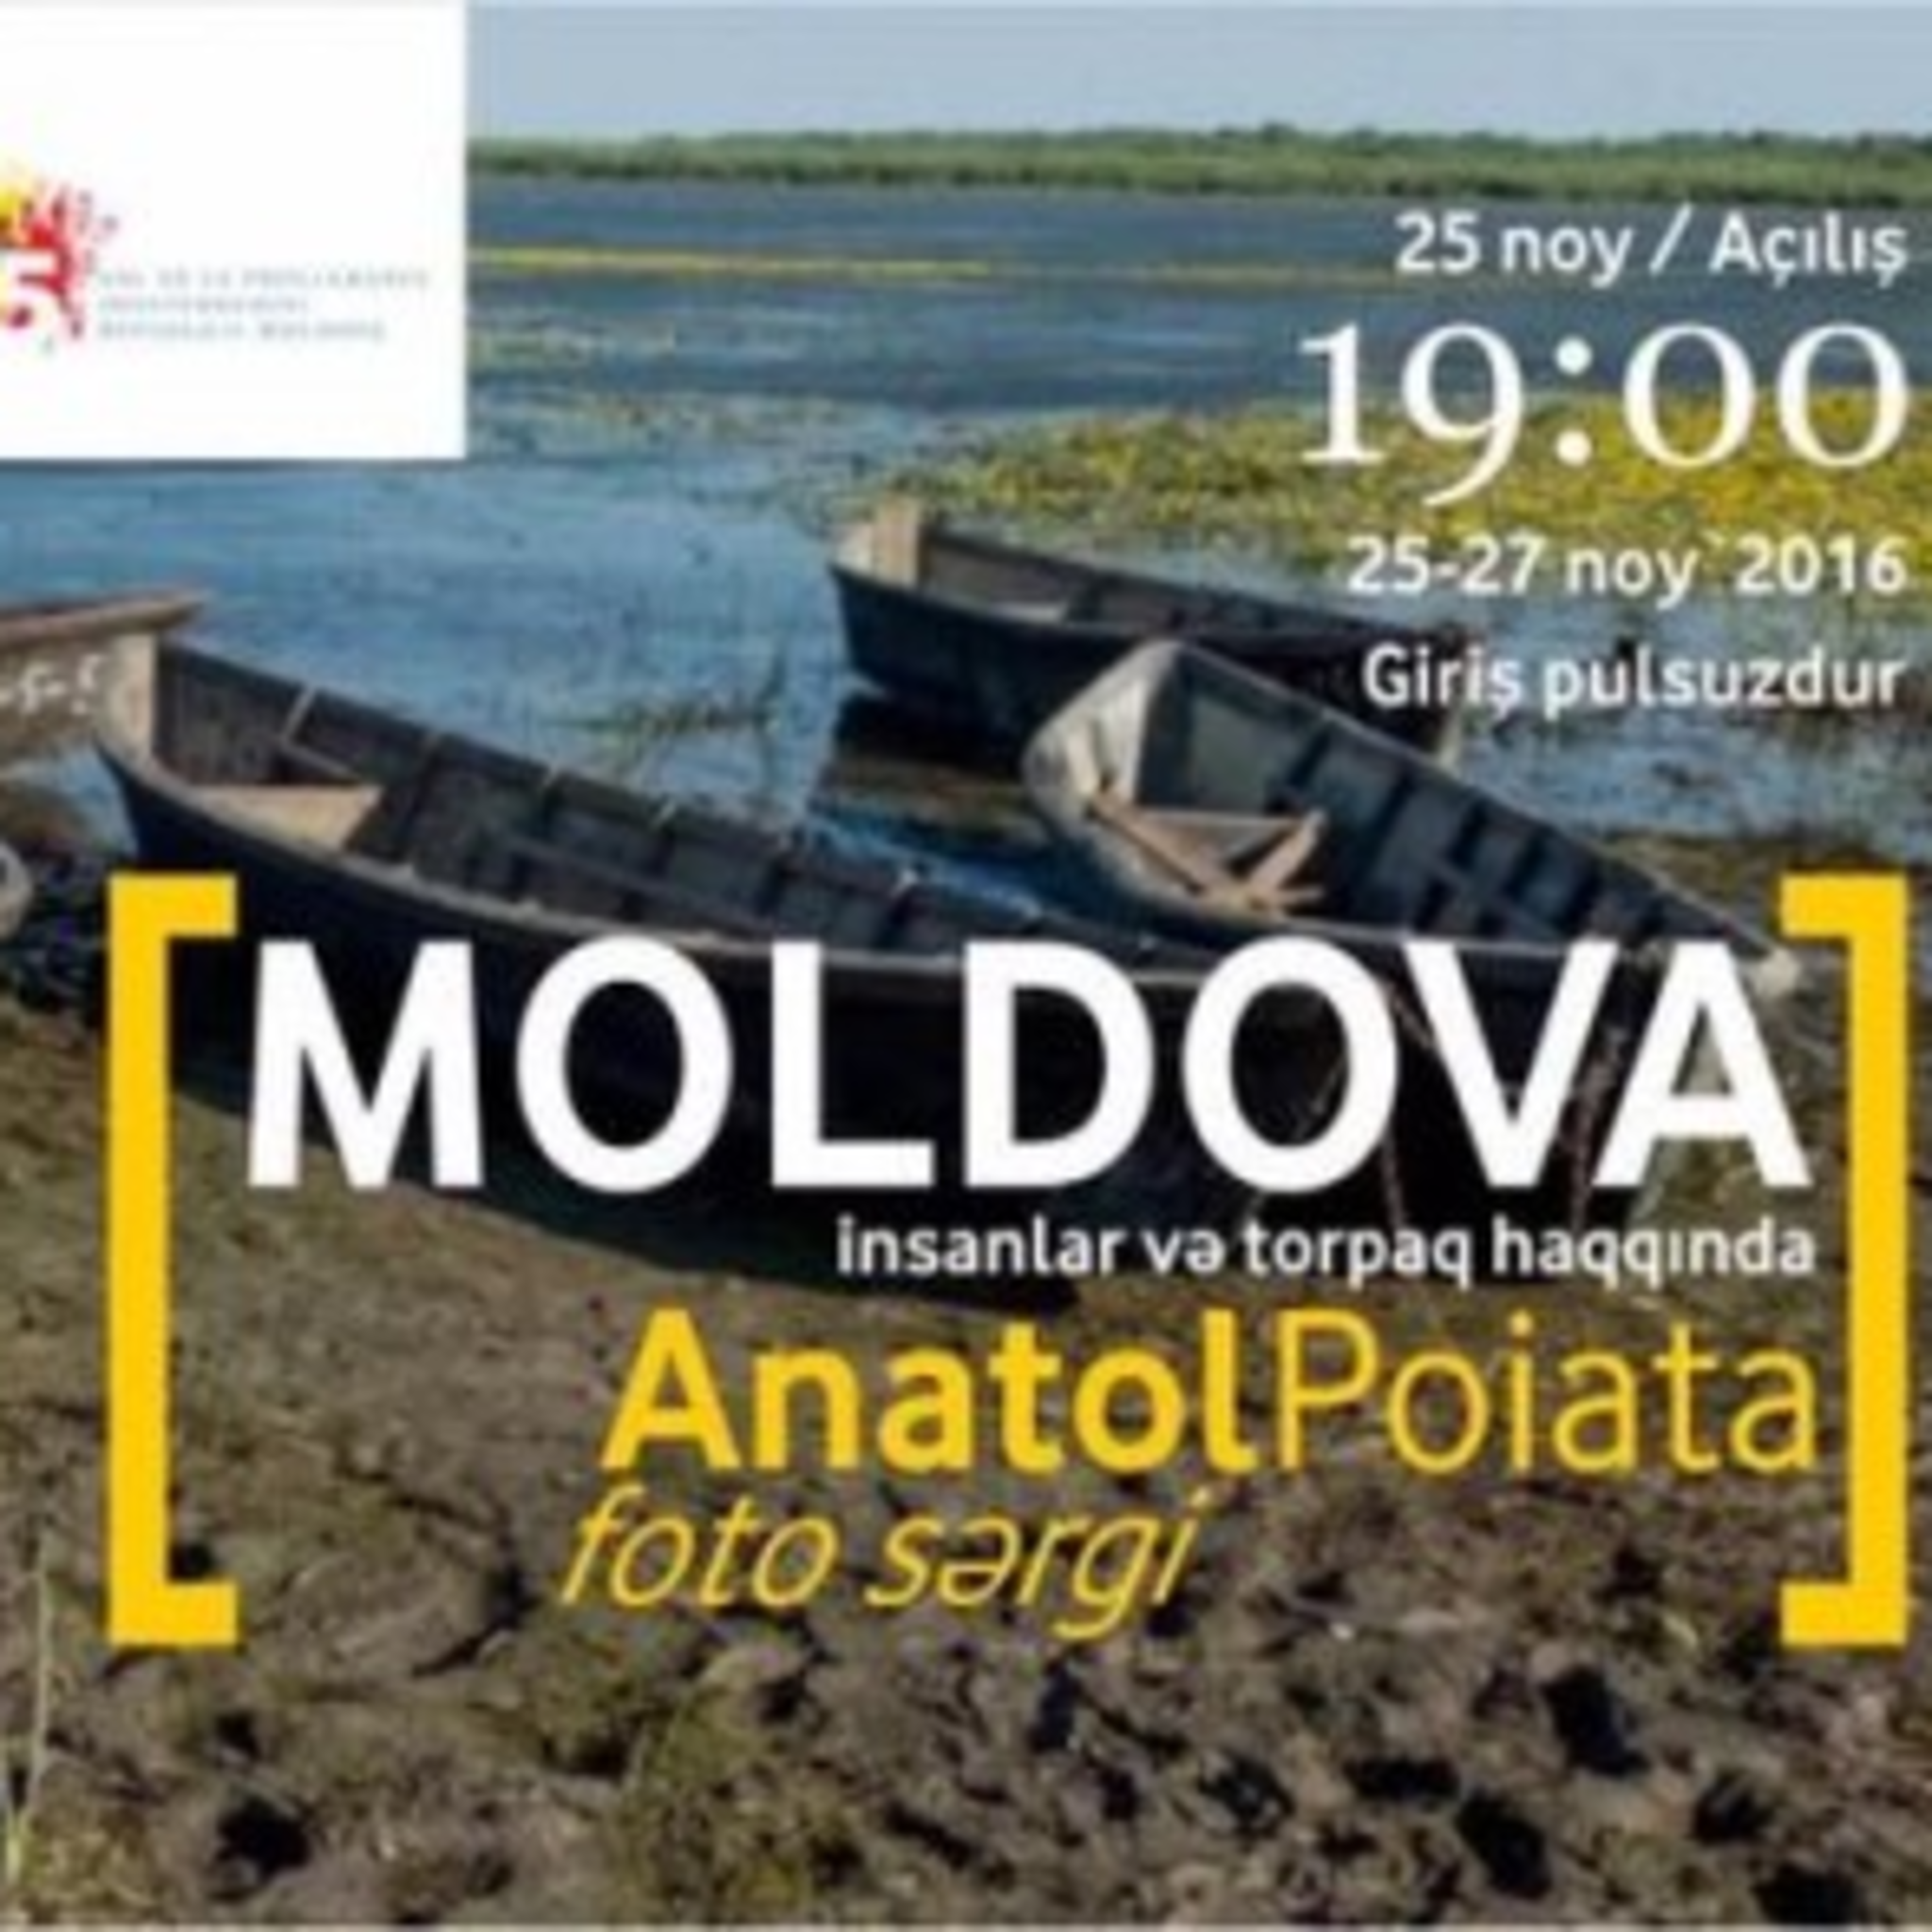 Exhibition Anatole Poiata Moldova. About the people and the land